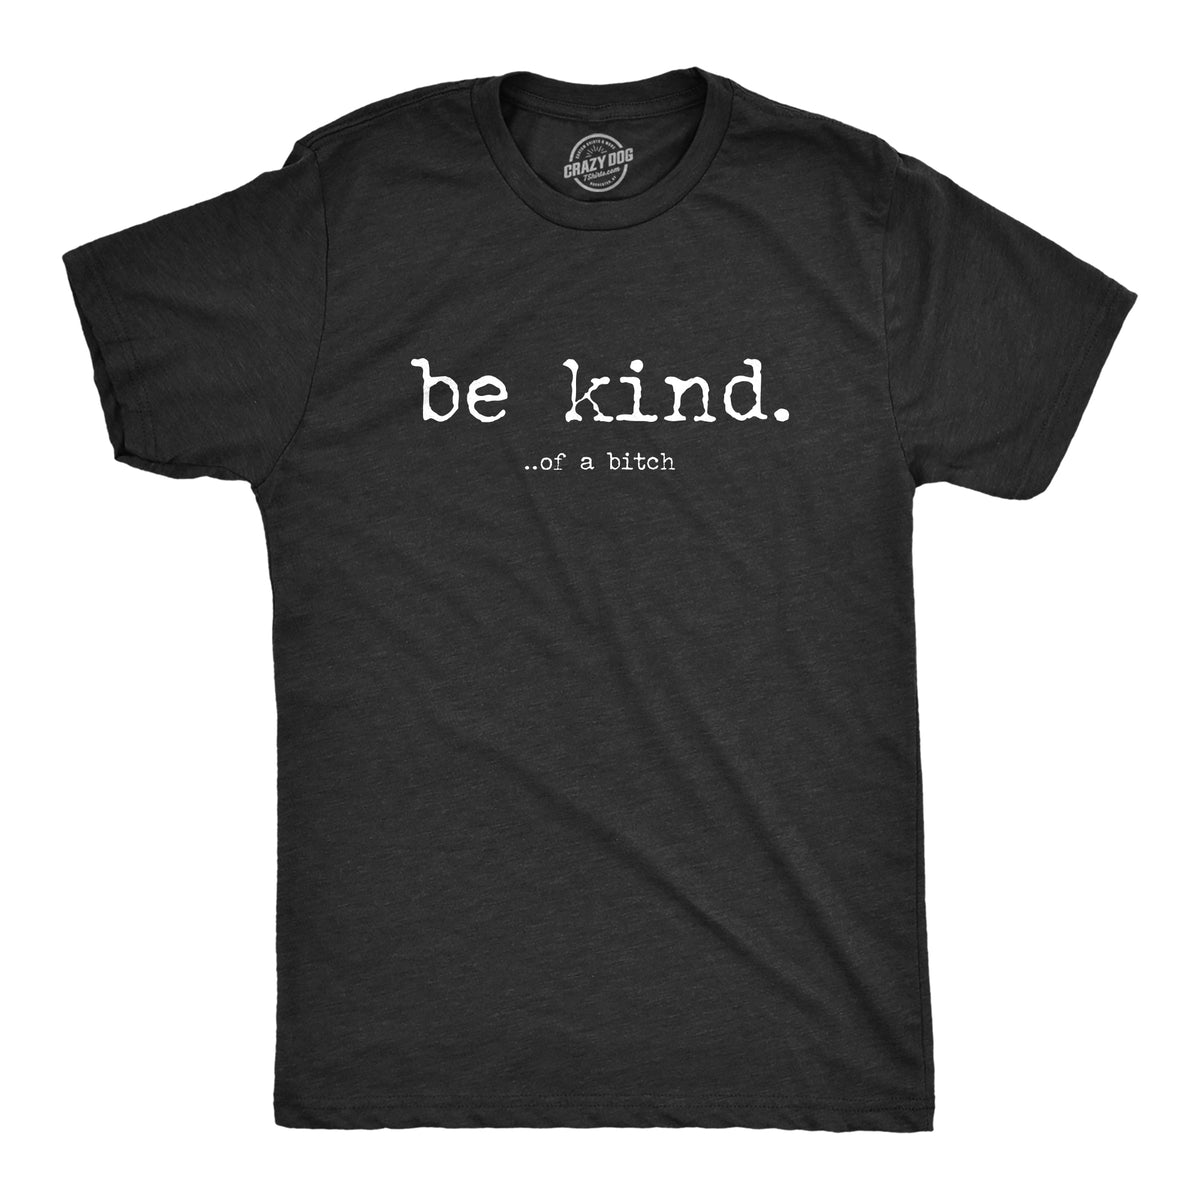 Funny Heather Black Be Kind Of A Bitch Mens T Shirt Nerdy Sarcastic Tee